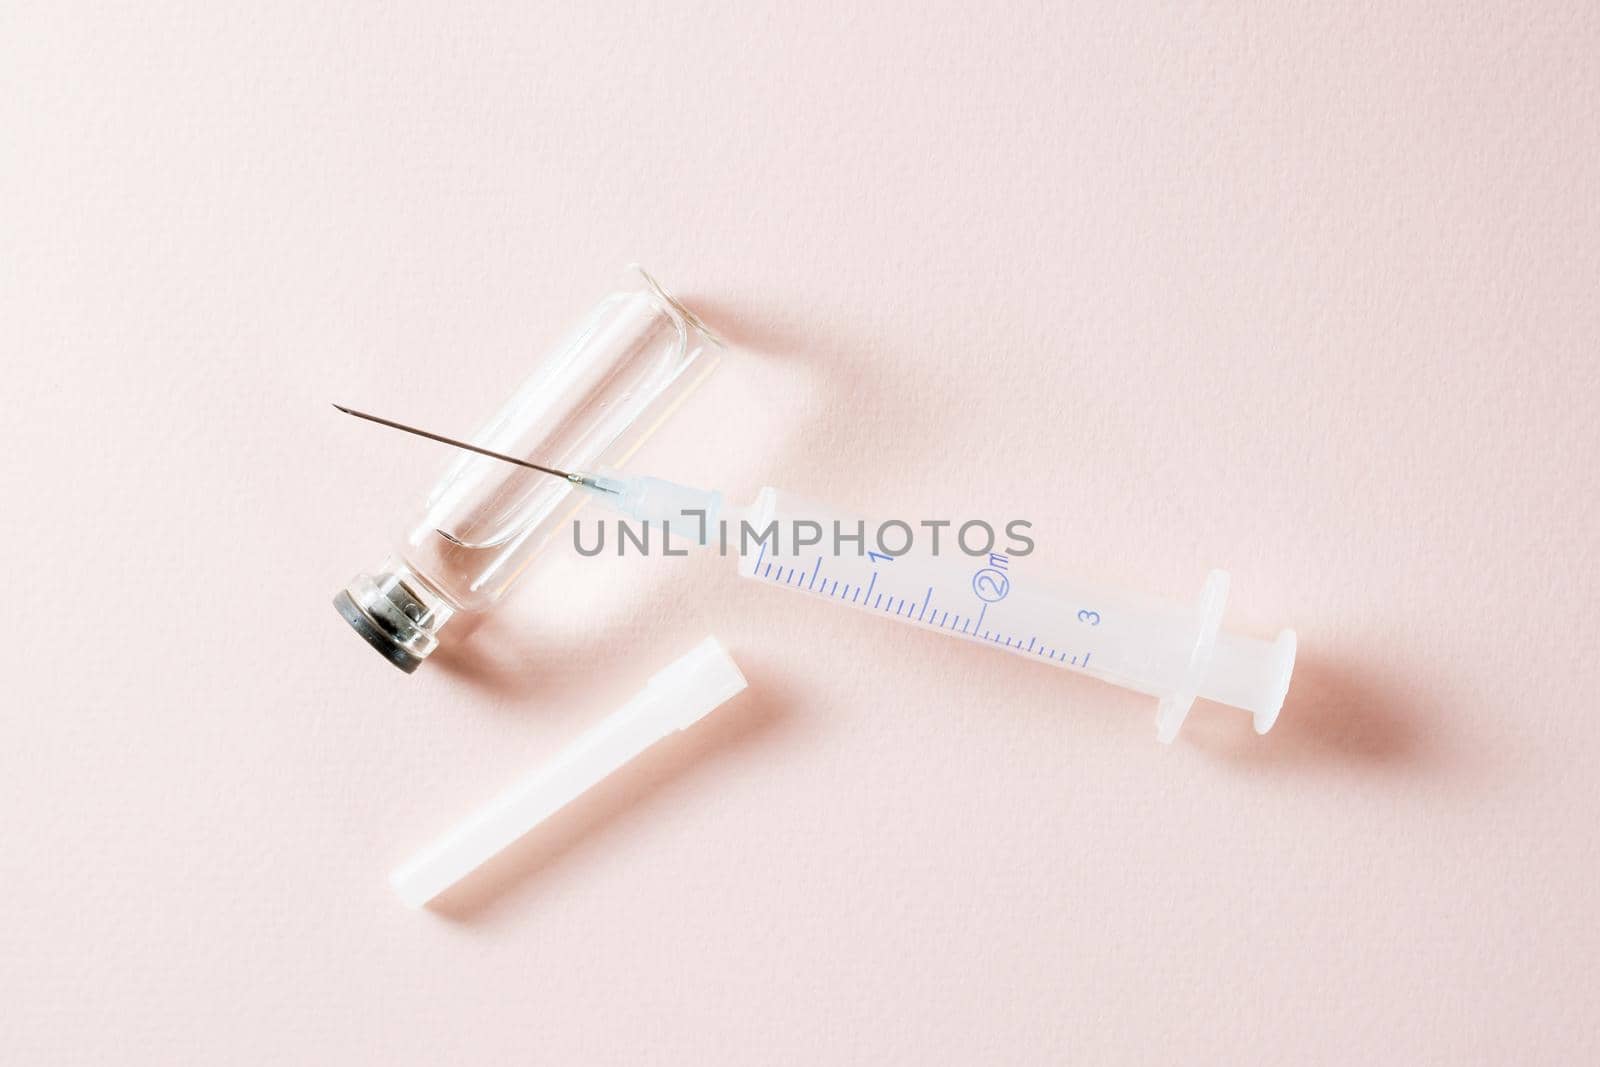 Vaccination and Immunization. Opened syringe on a glass vial with vaccine. Top view